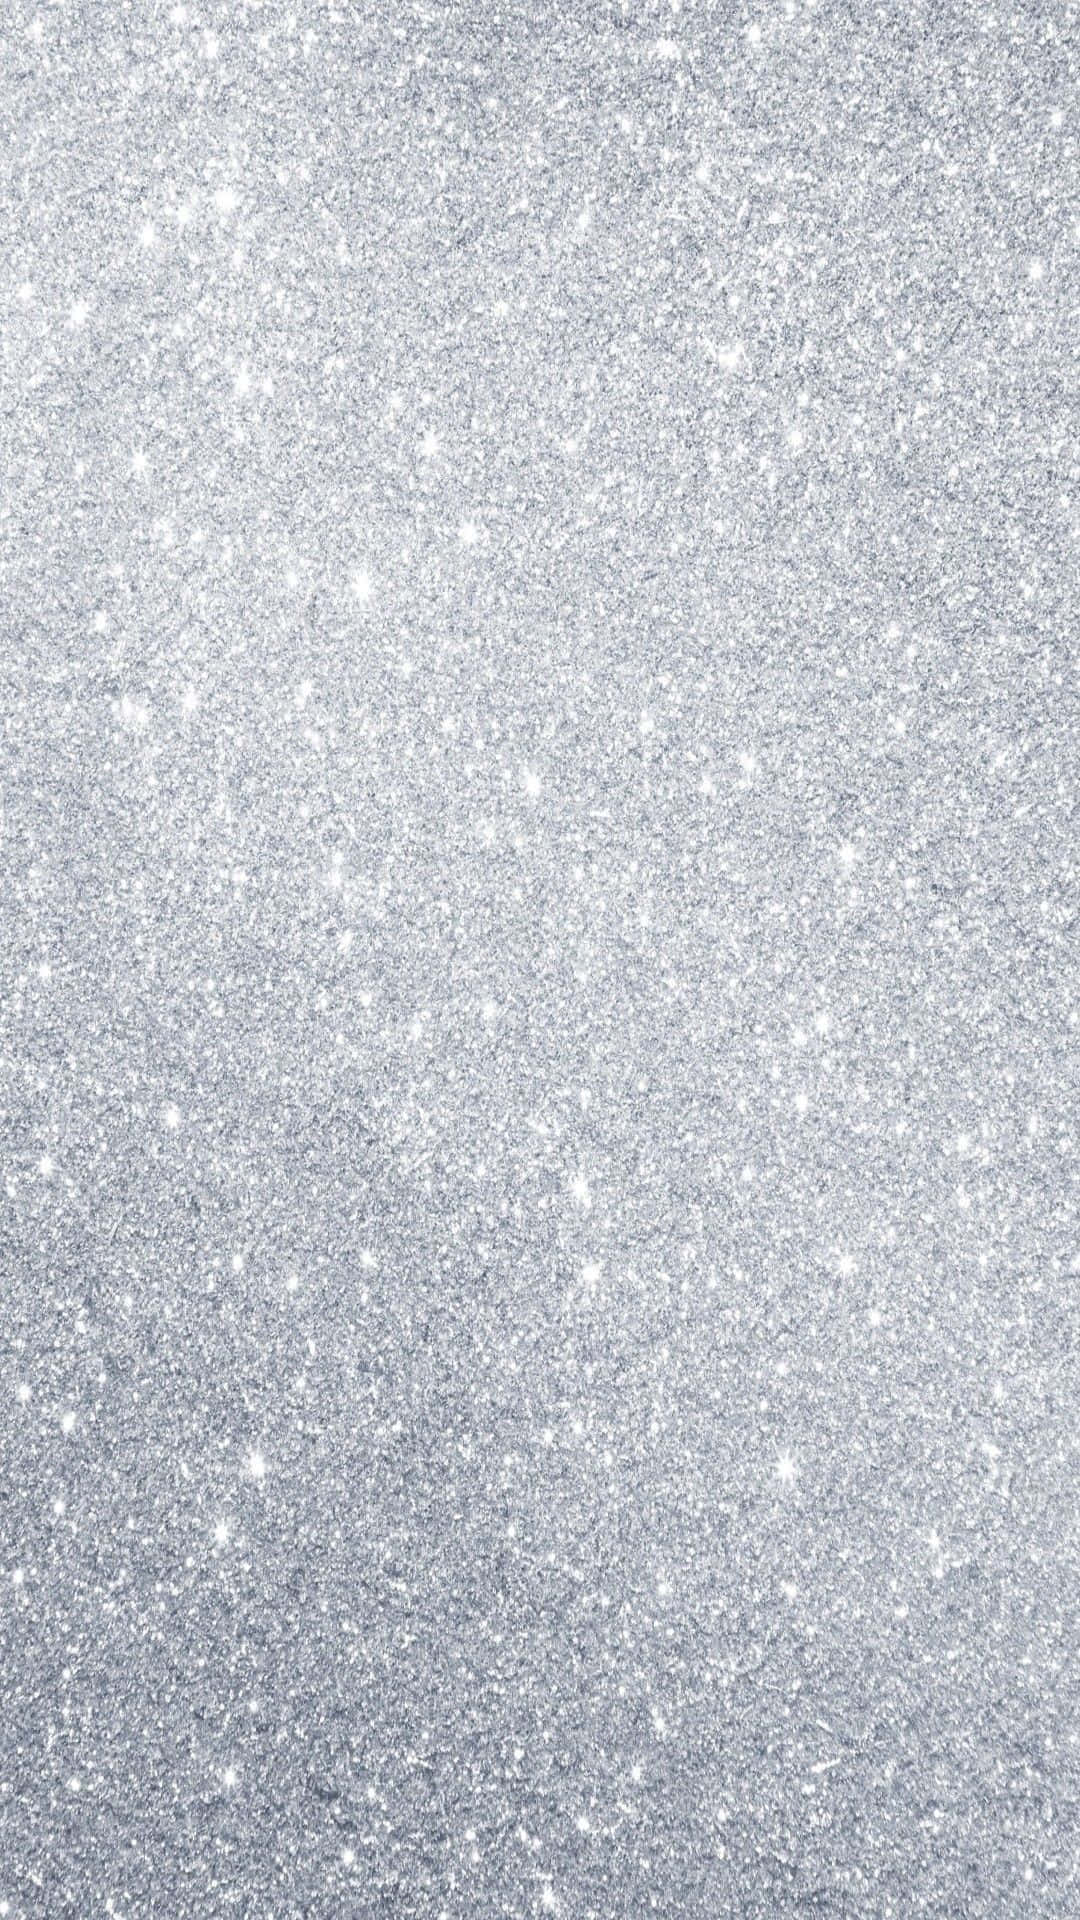 A silver glitter background with a white sparkly texture - Silver